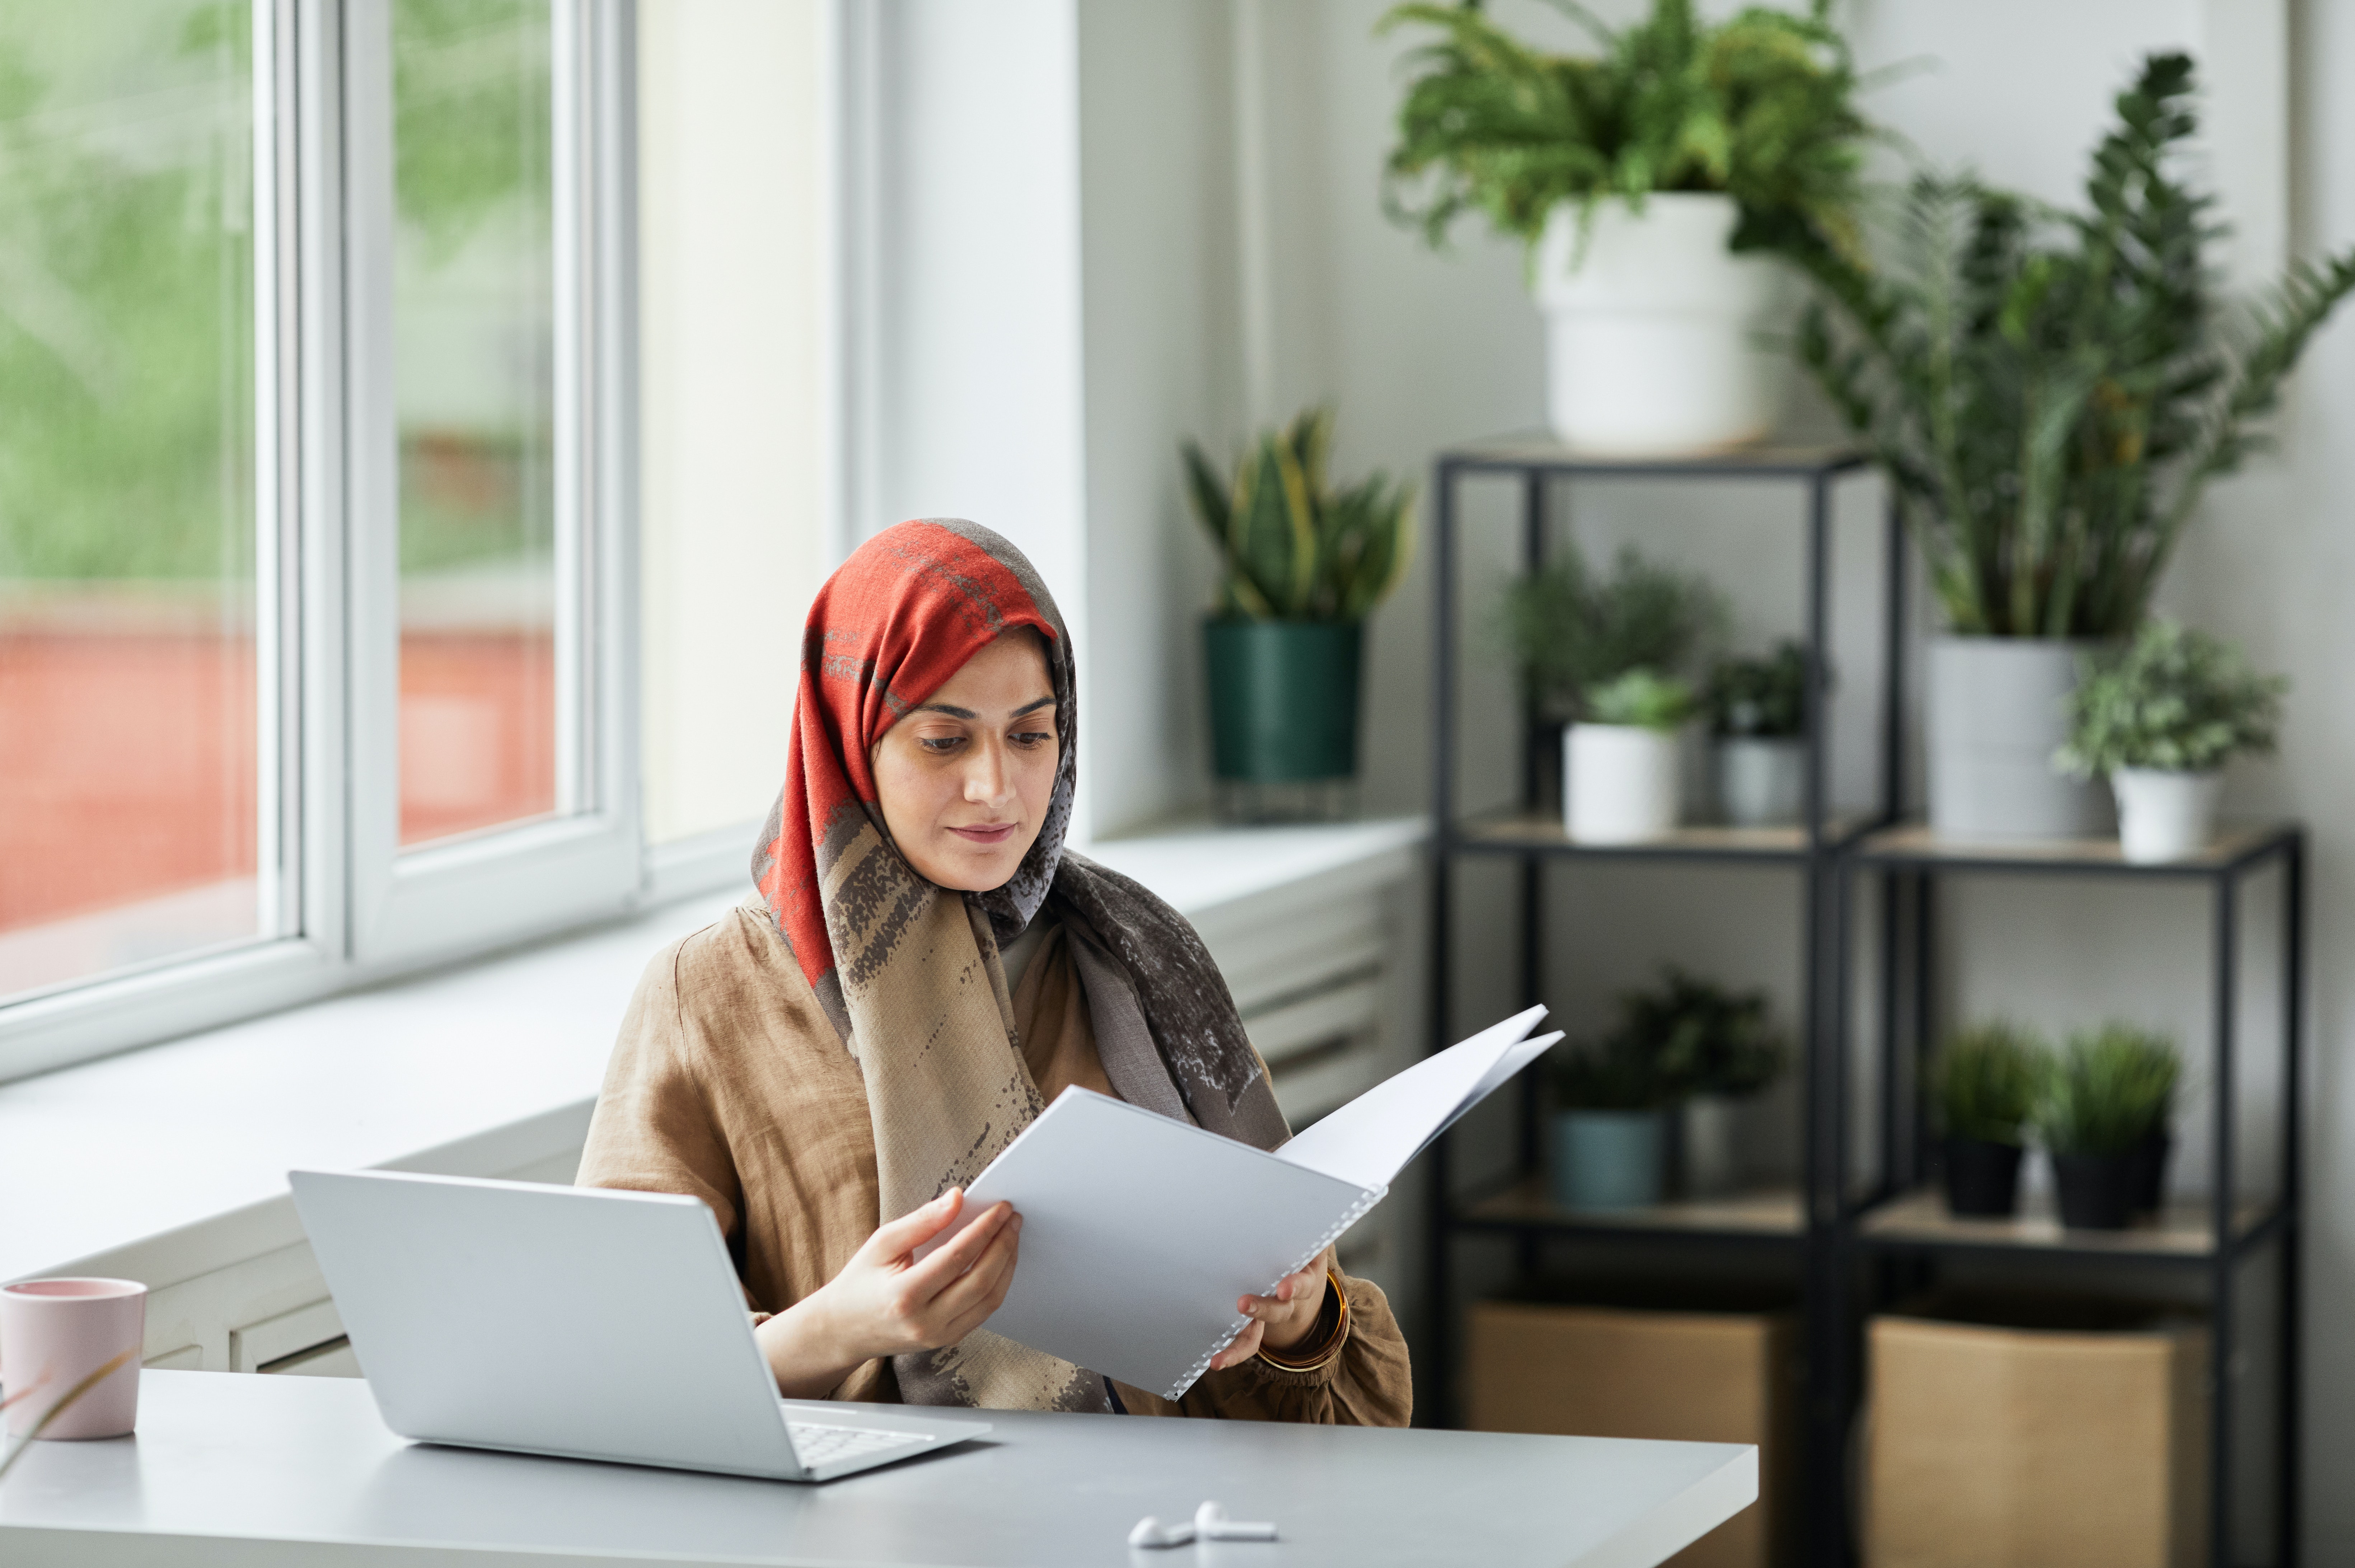 Lady with headscarf looking at booklet with laptop in front of her